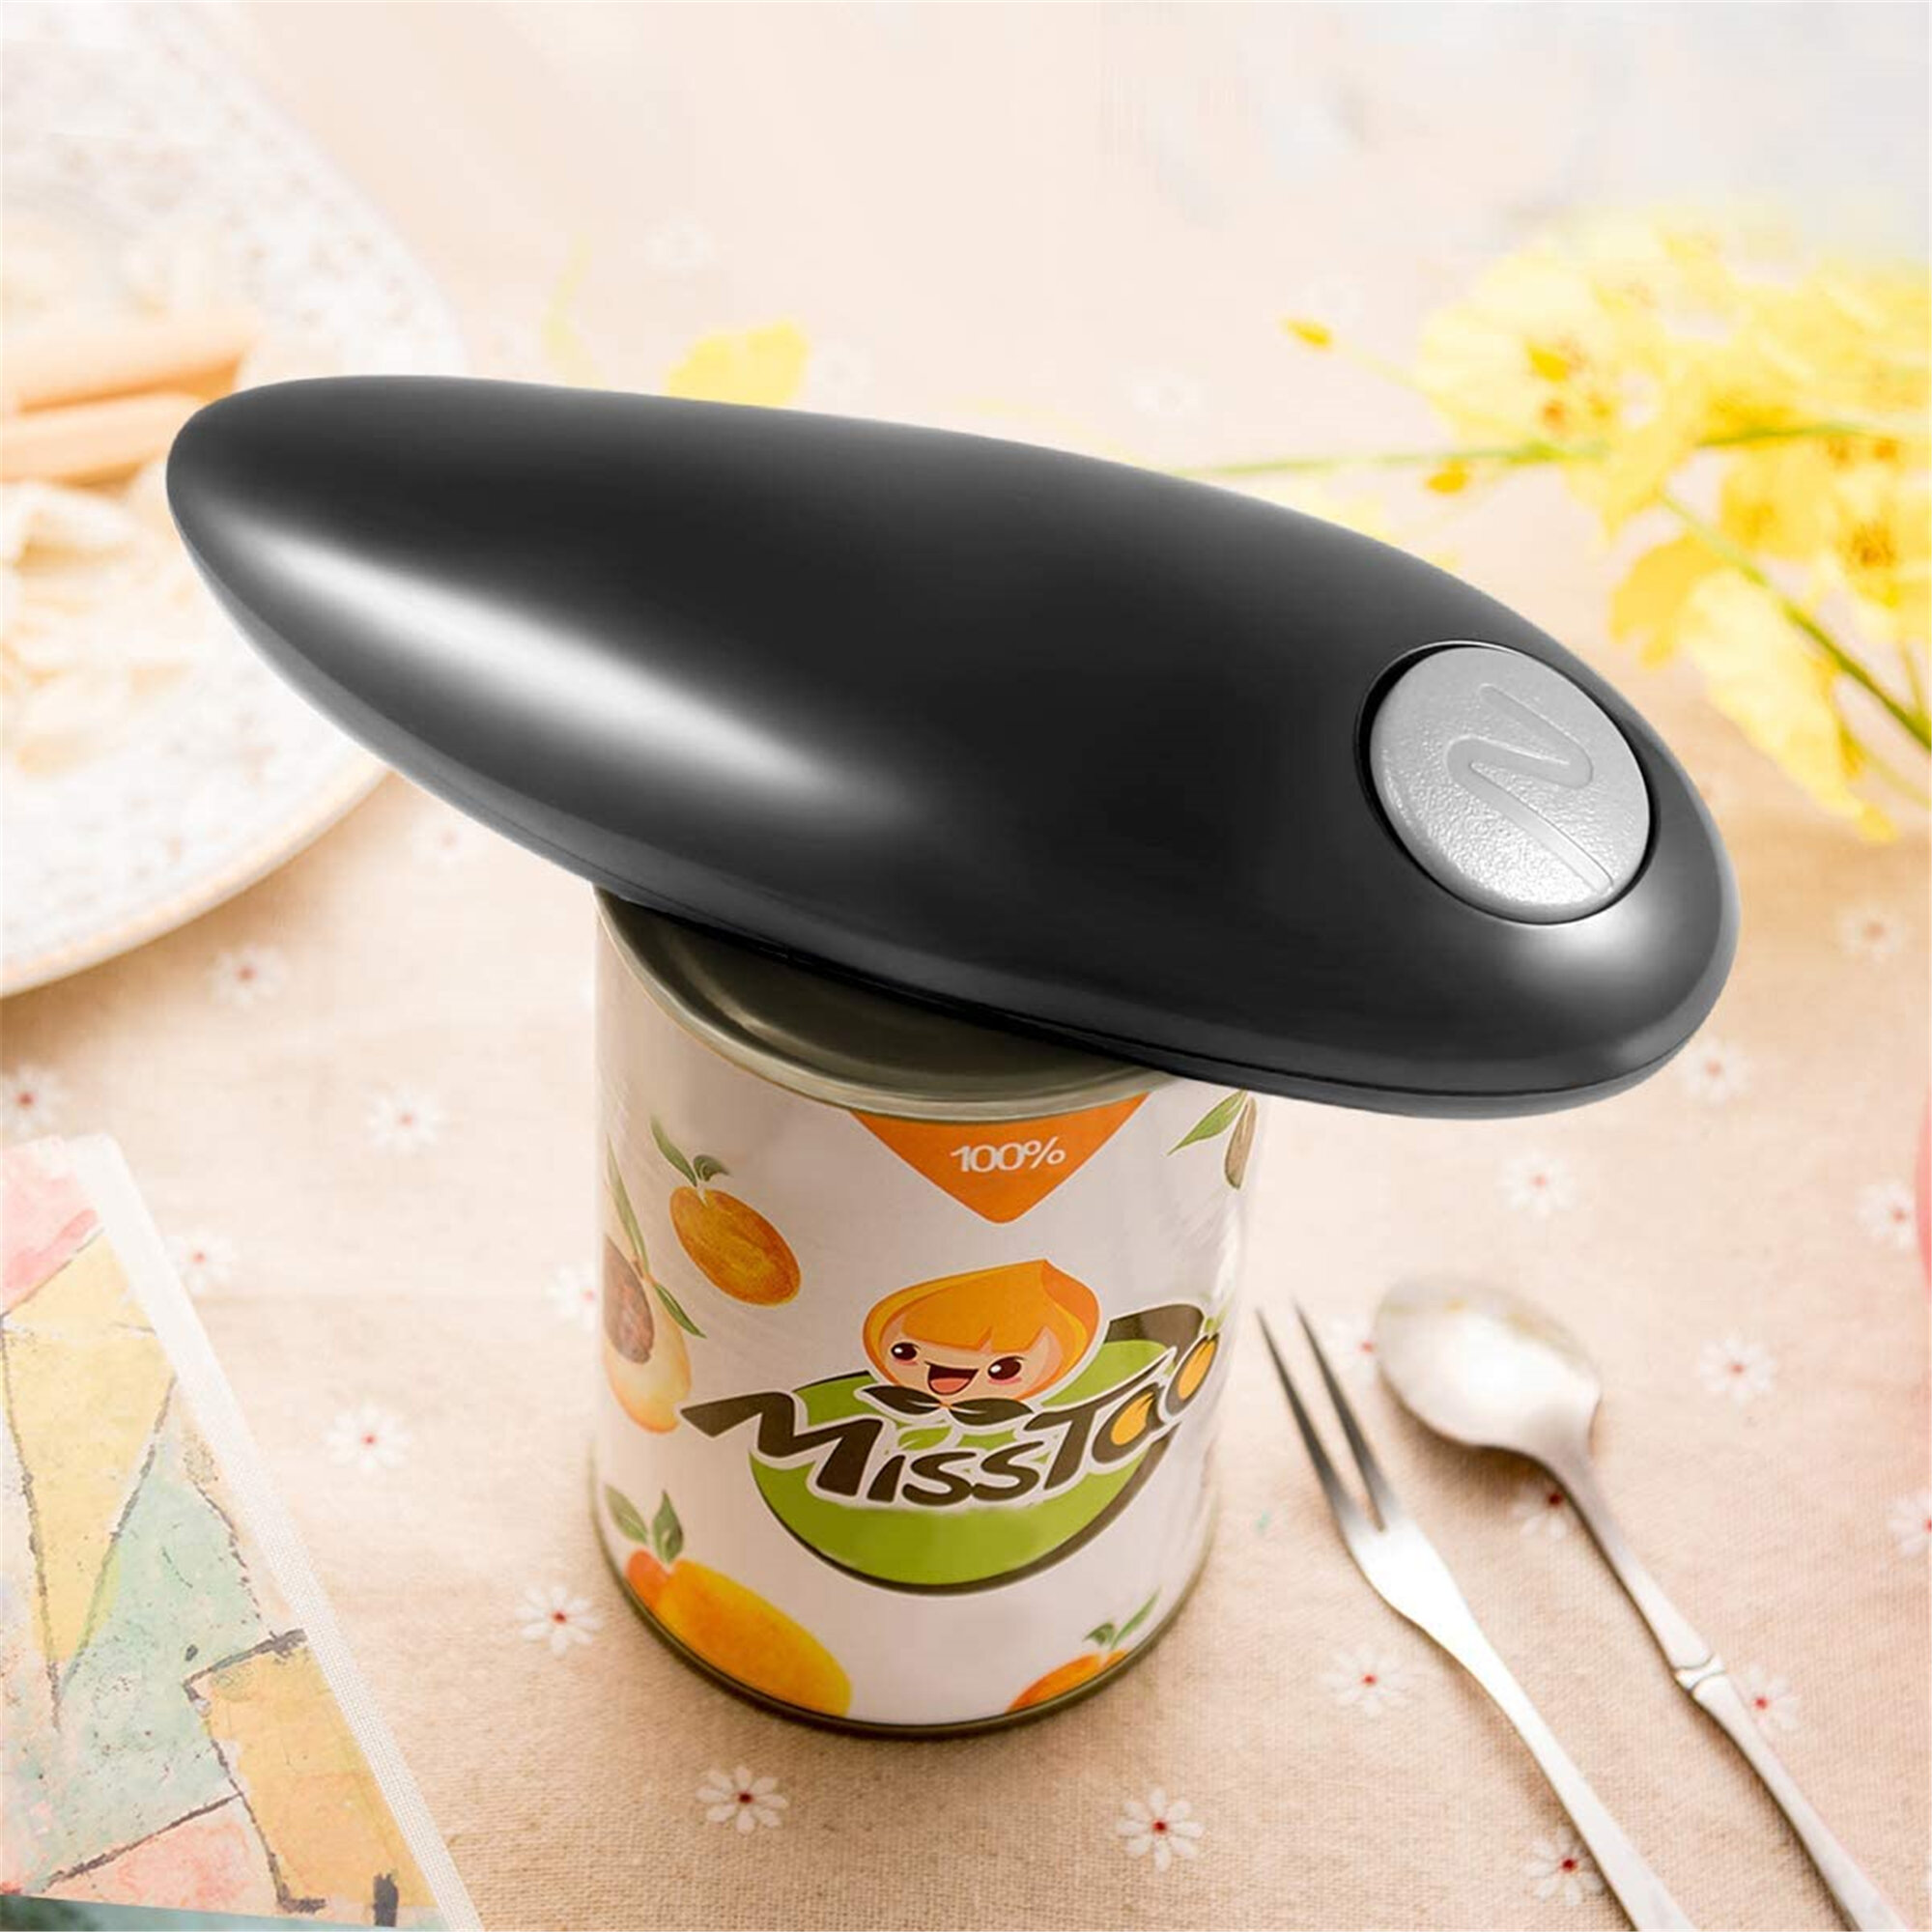 Smooth Edge Automatic Electric Can Opener Chefs Best Choice,Best Kitchen Gadget for Arthritis Restaurant can Opener Electric Can Opener